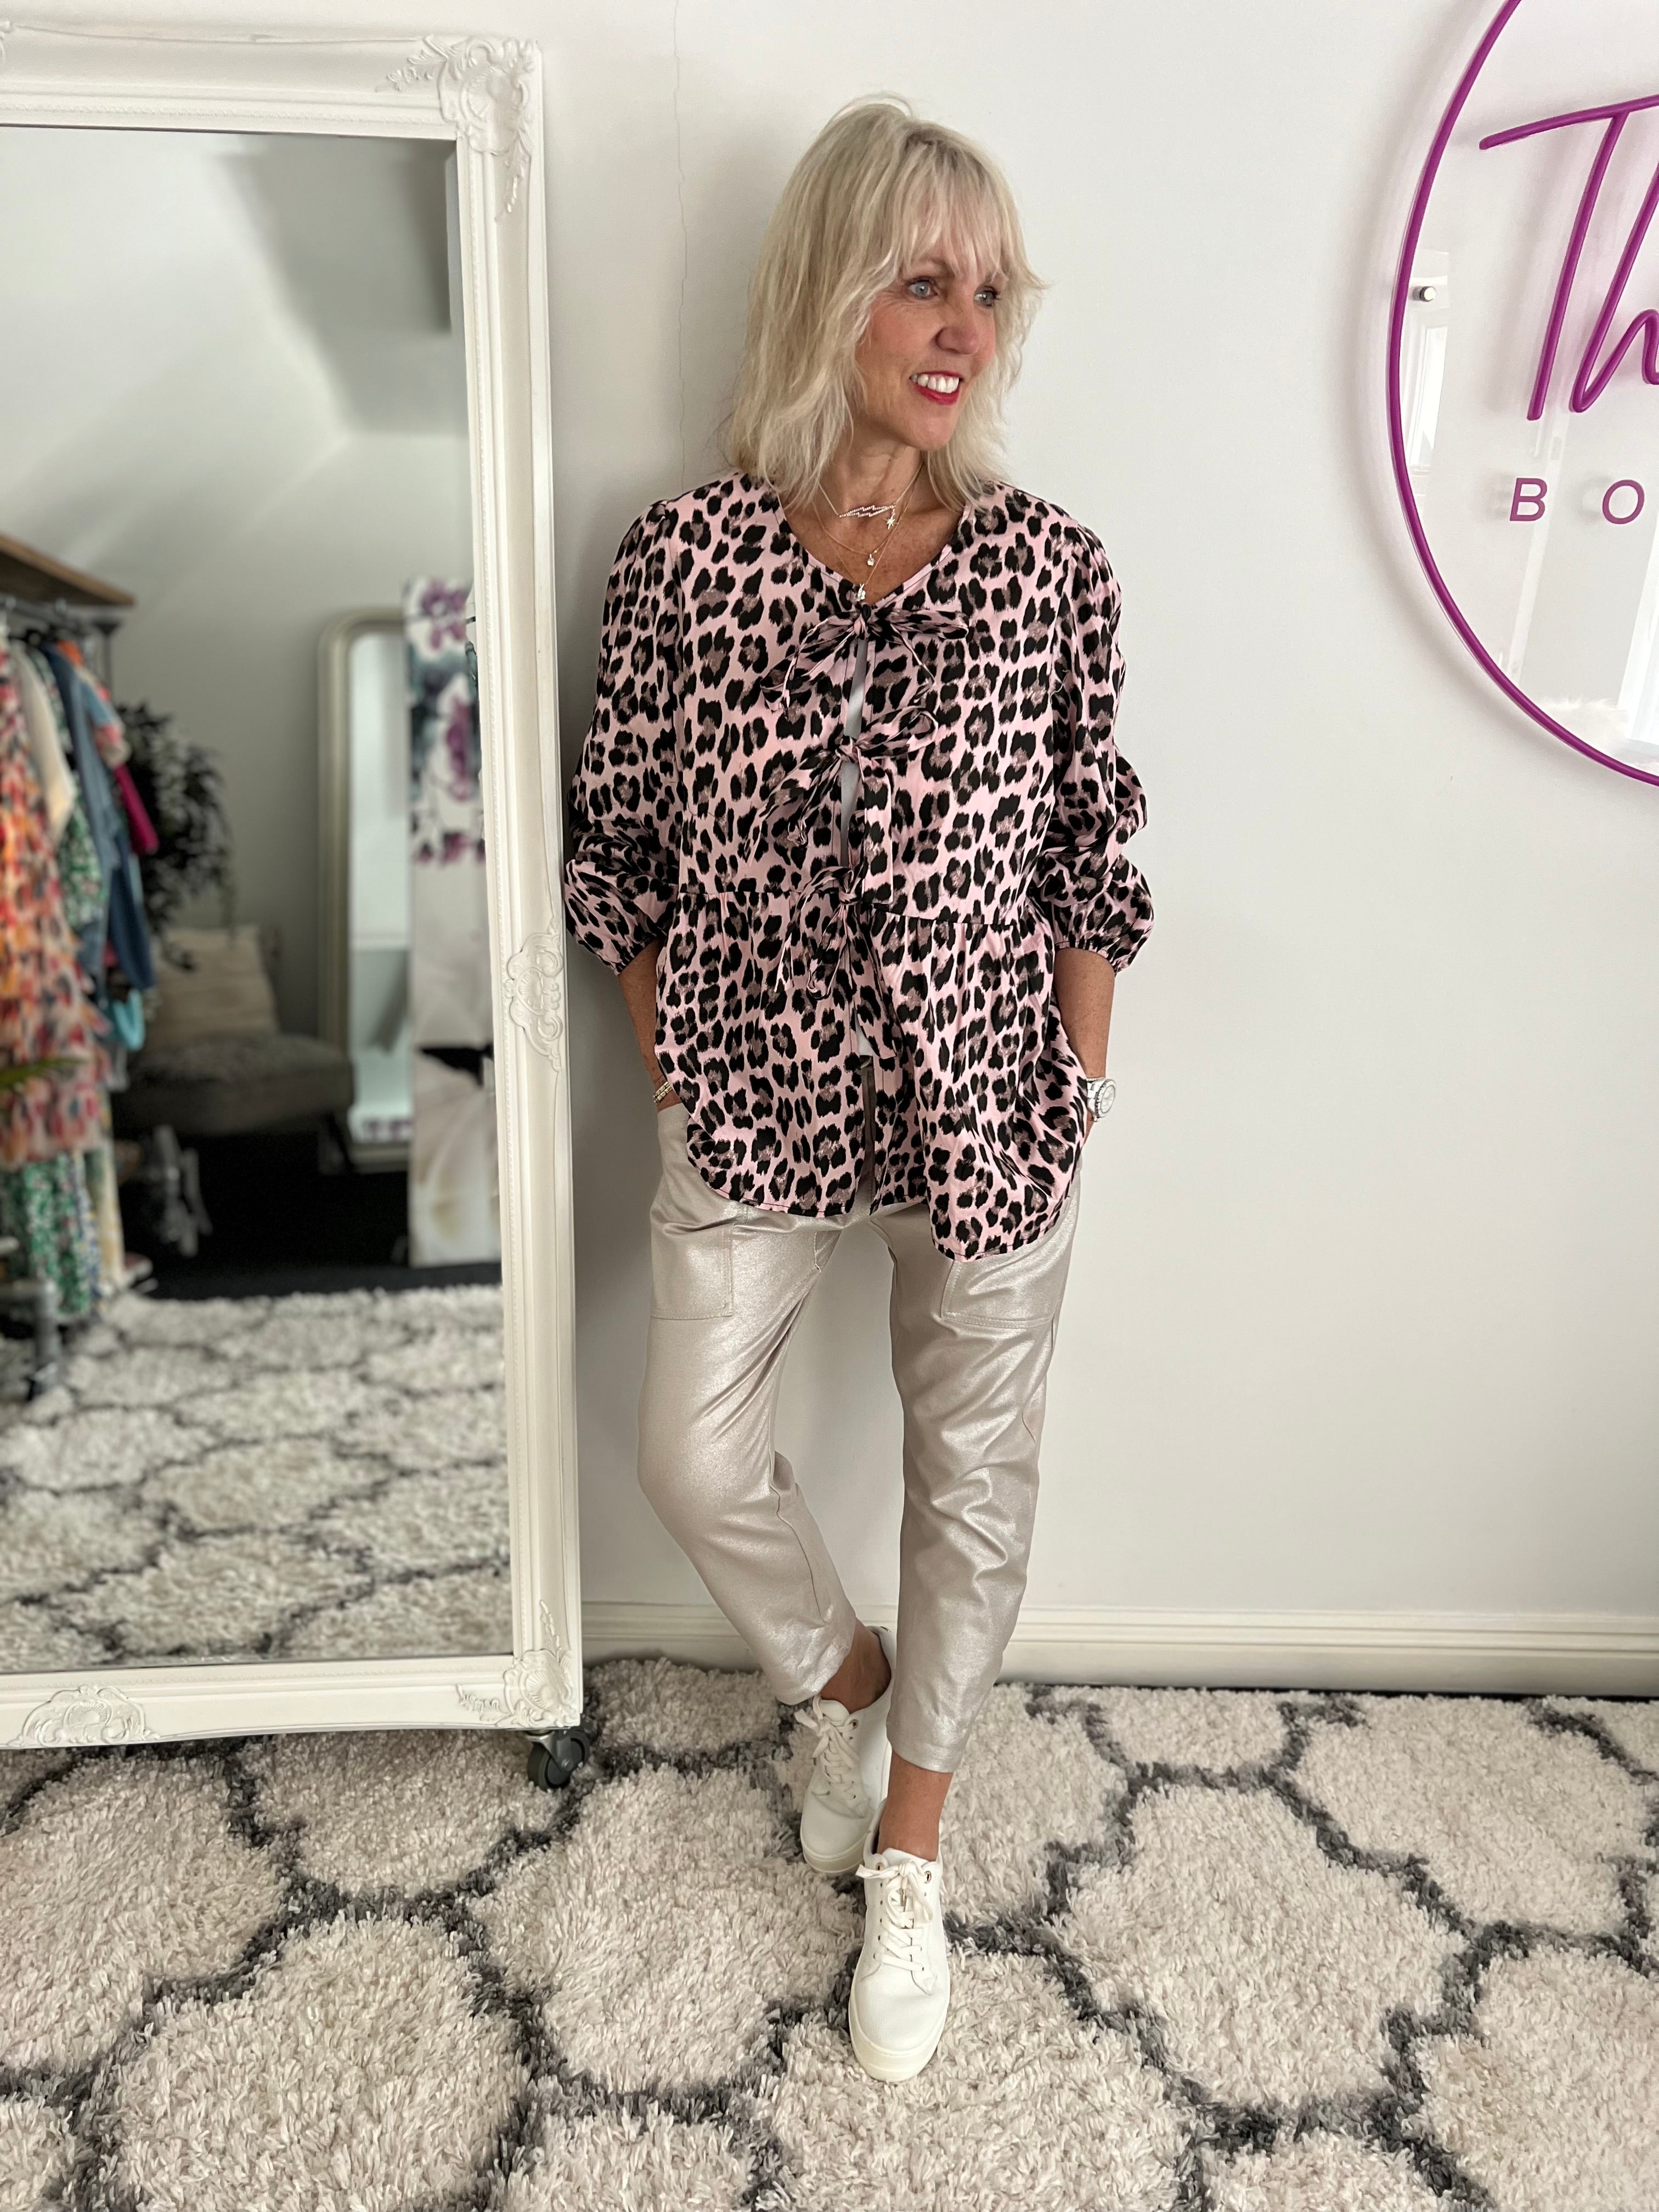 Leopard Tie Front Blouse in Pink